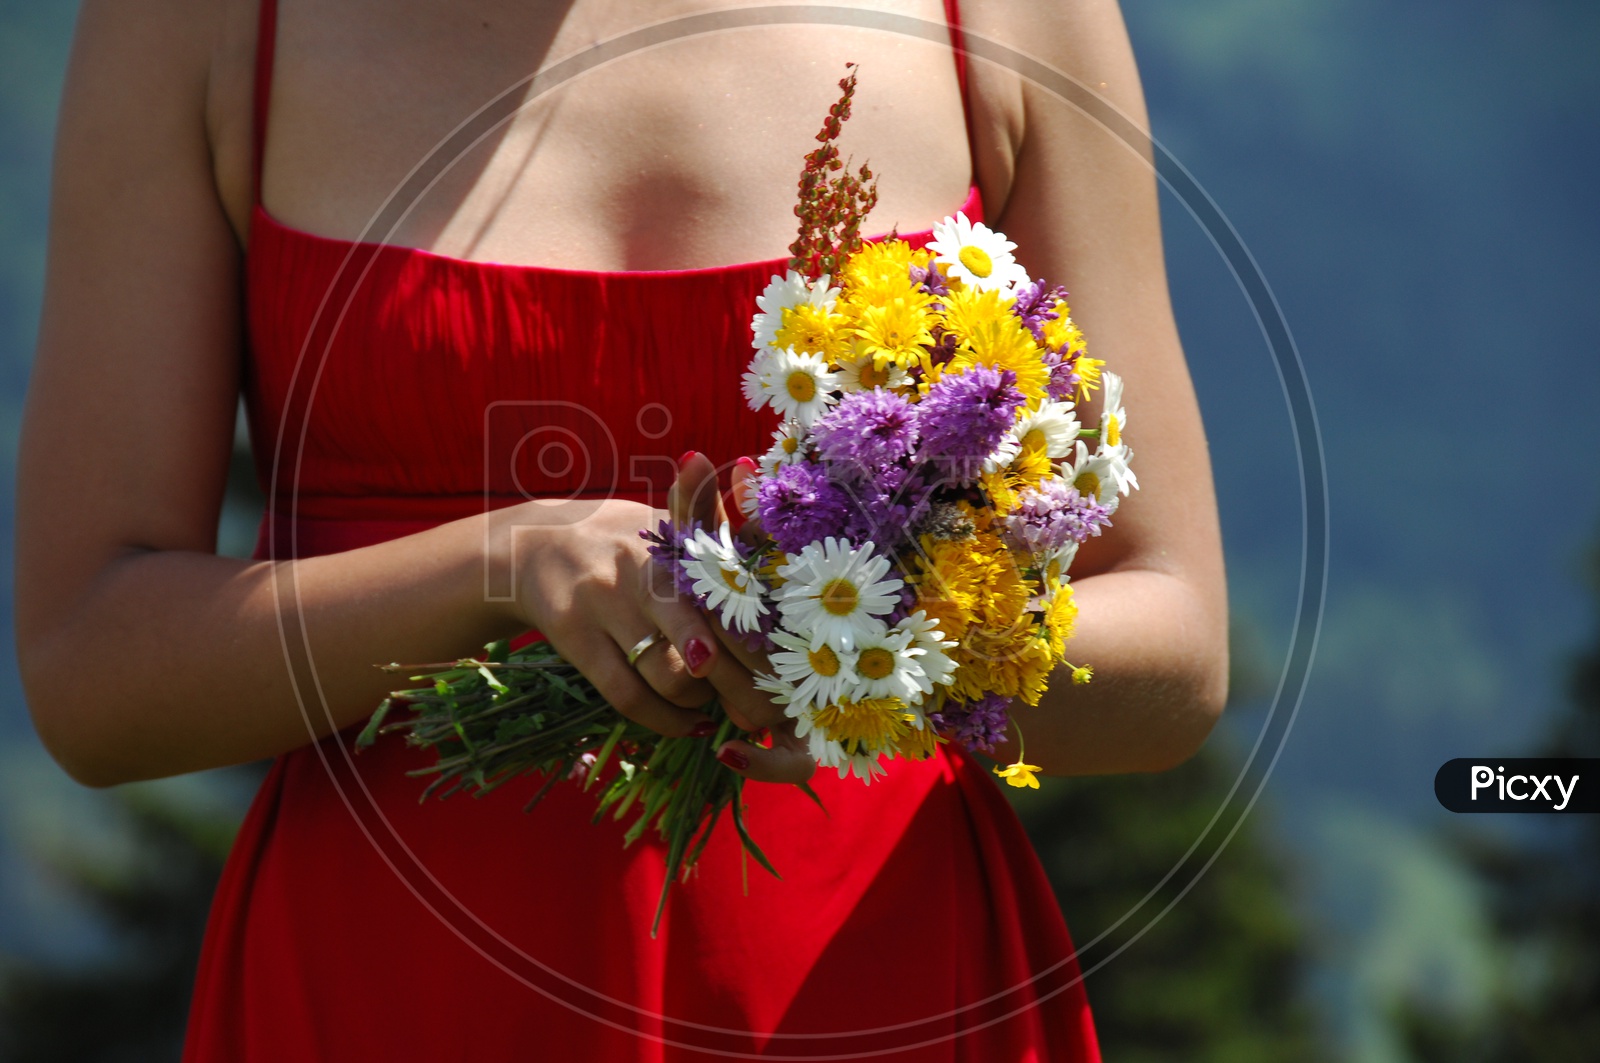 Female Model  Hands with Flowers